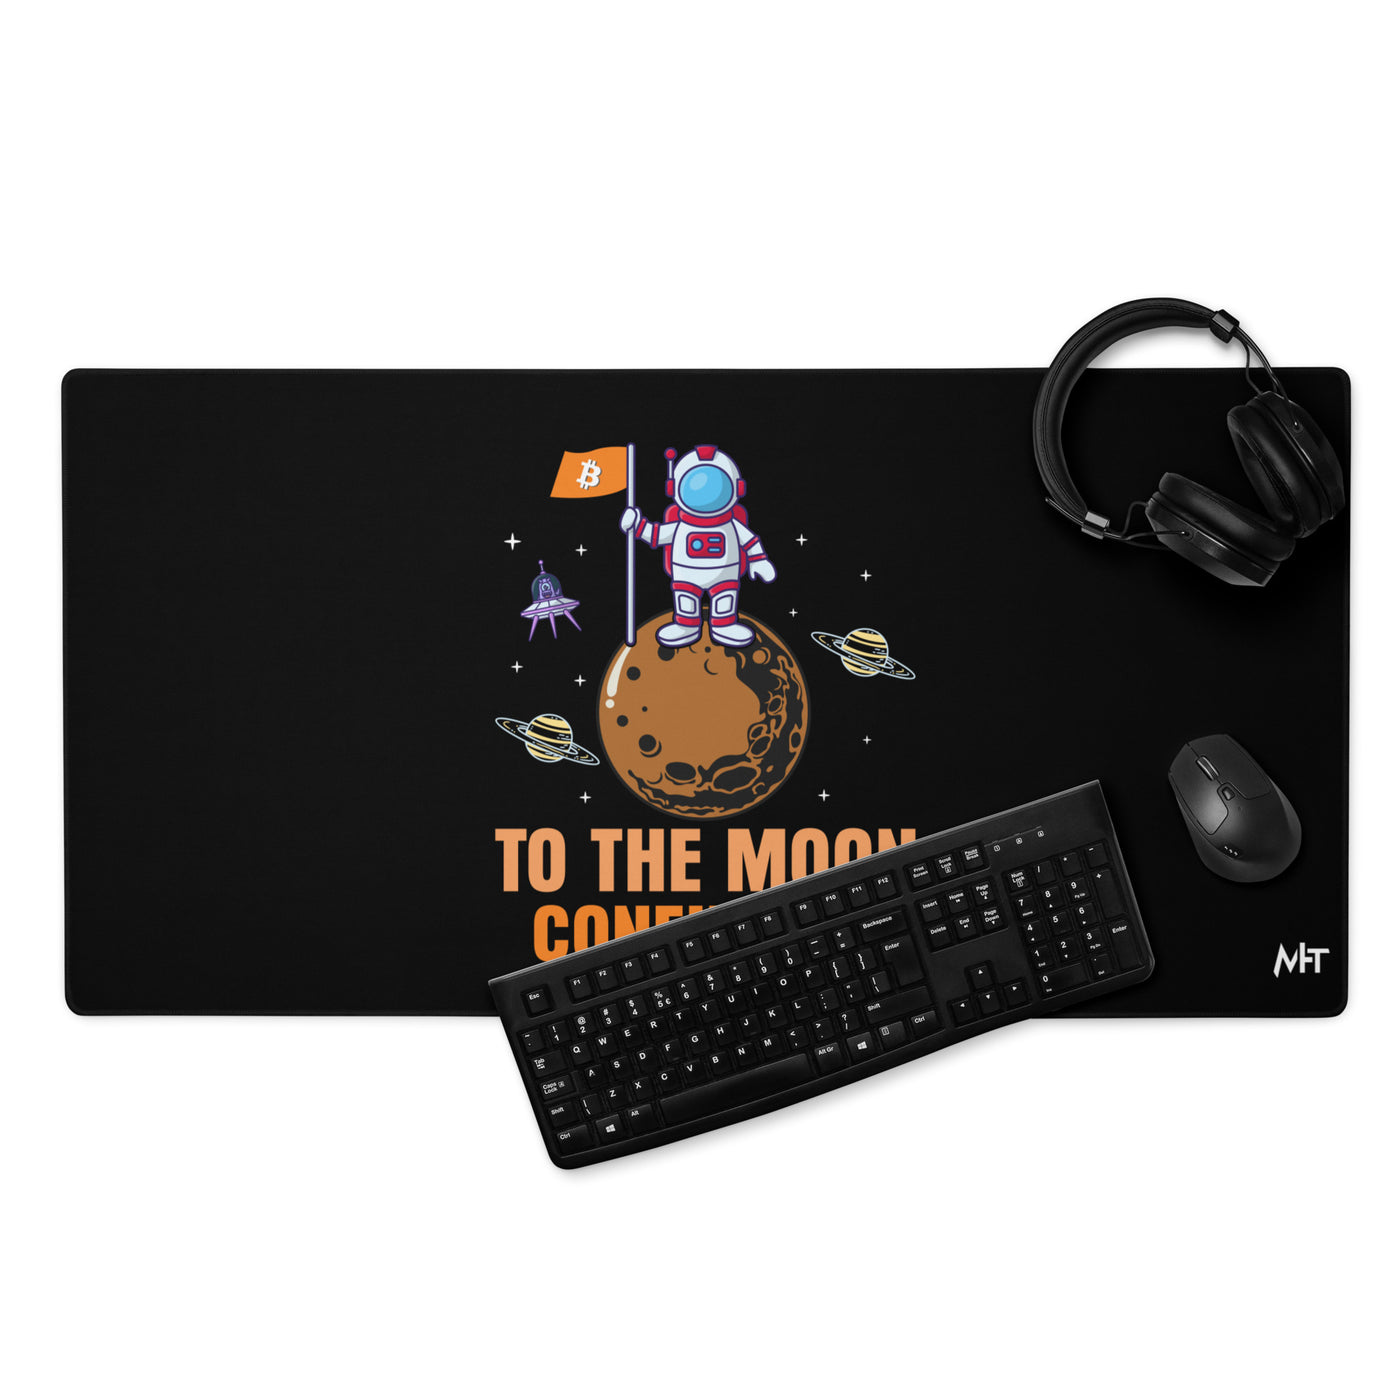 To The Moon Confirmed Desk Mat